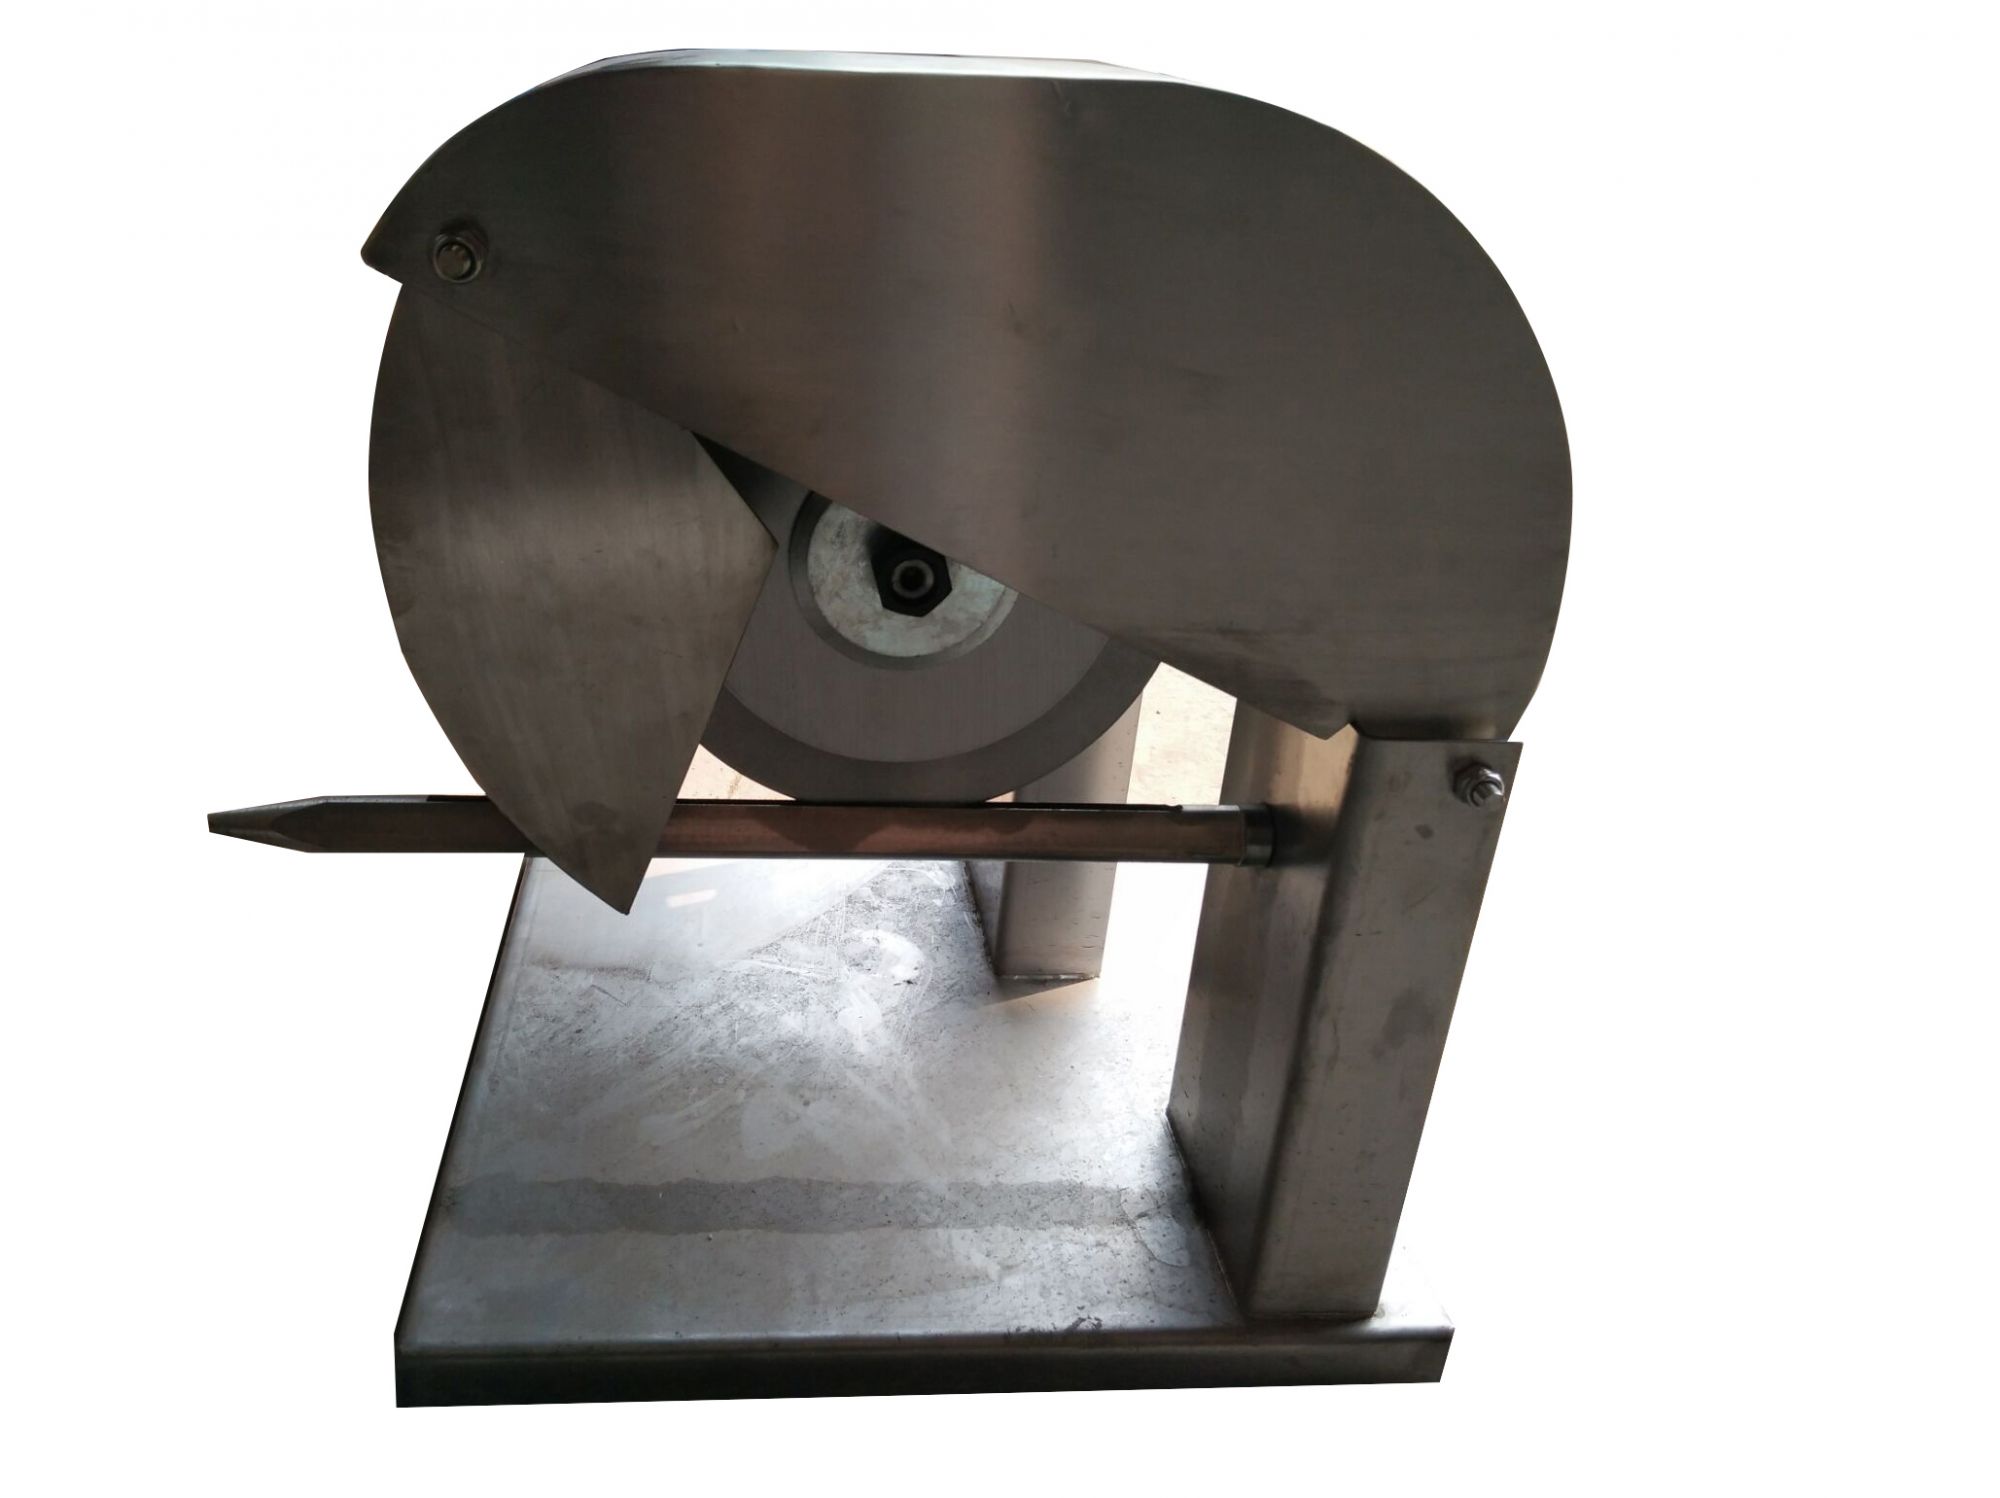 http://www.limafoodmach.com/d/pic/poultry-meat-cutter-2.jpg